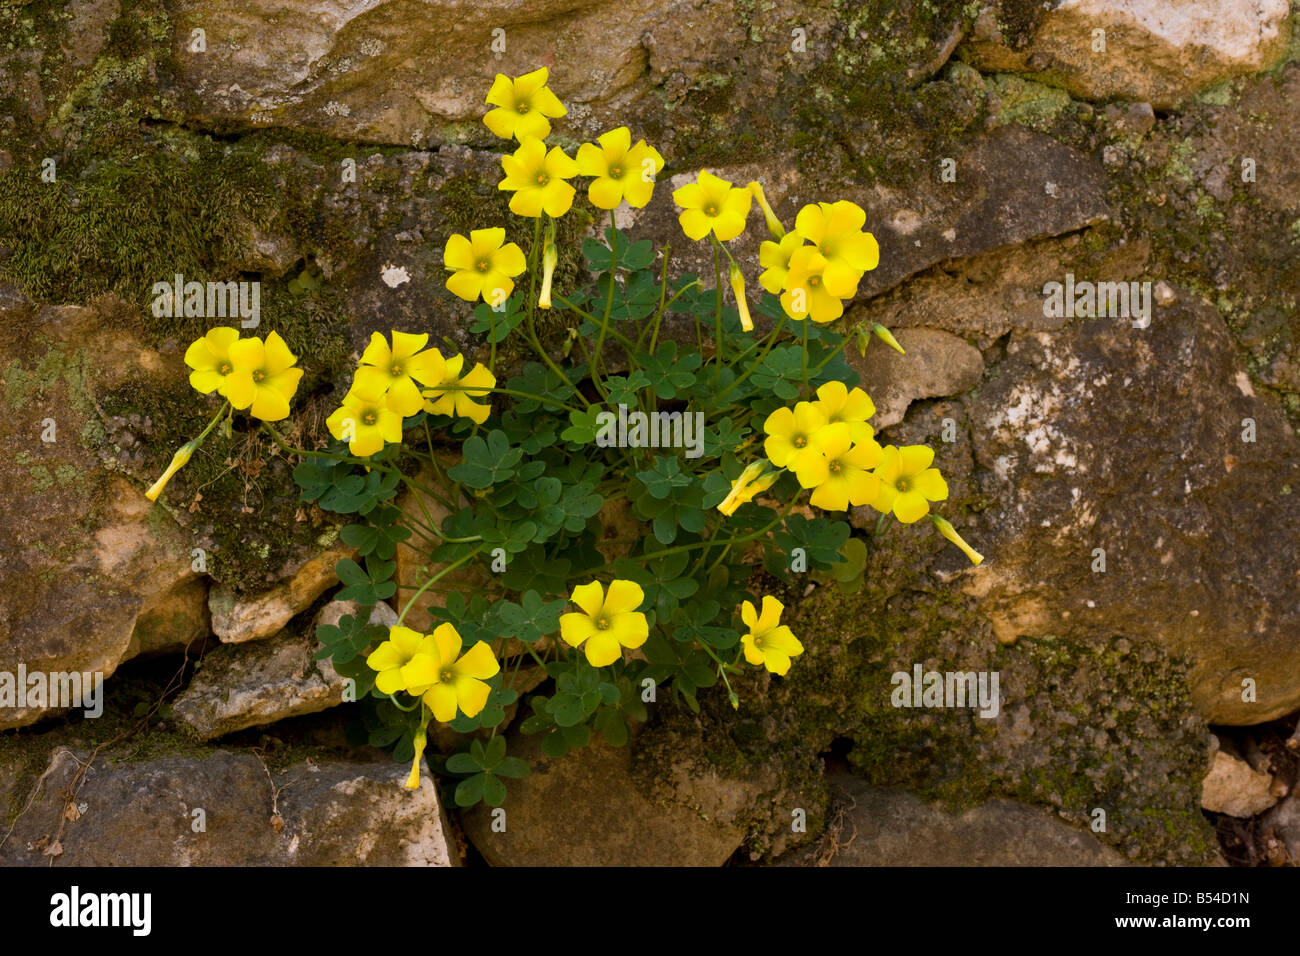 Bermuda Buttercup Oxalis pes caprae introduced from South Africa now widespread weed in Mediterranean area Mani Greece Stock Photo